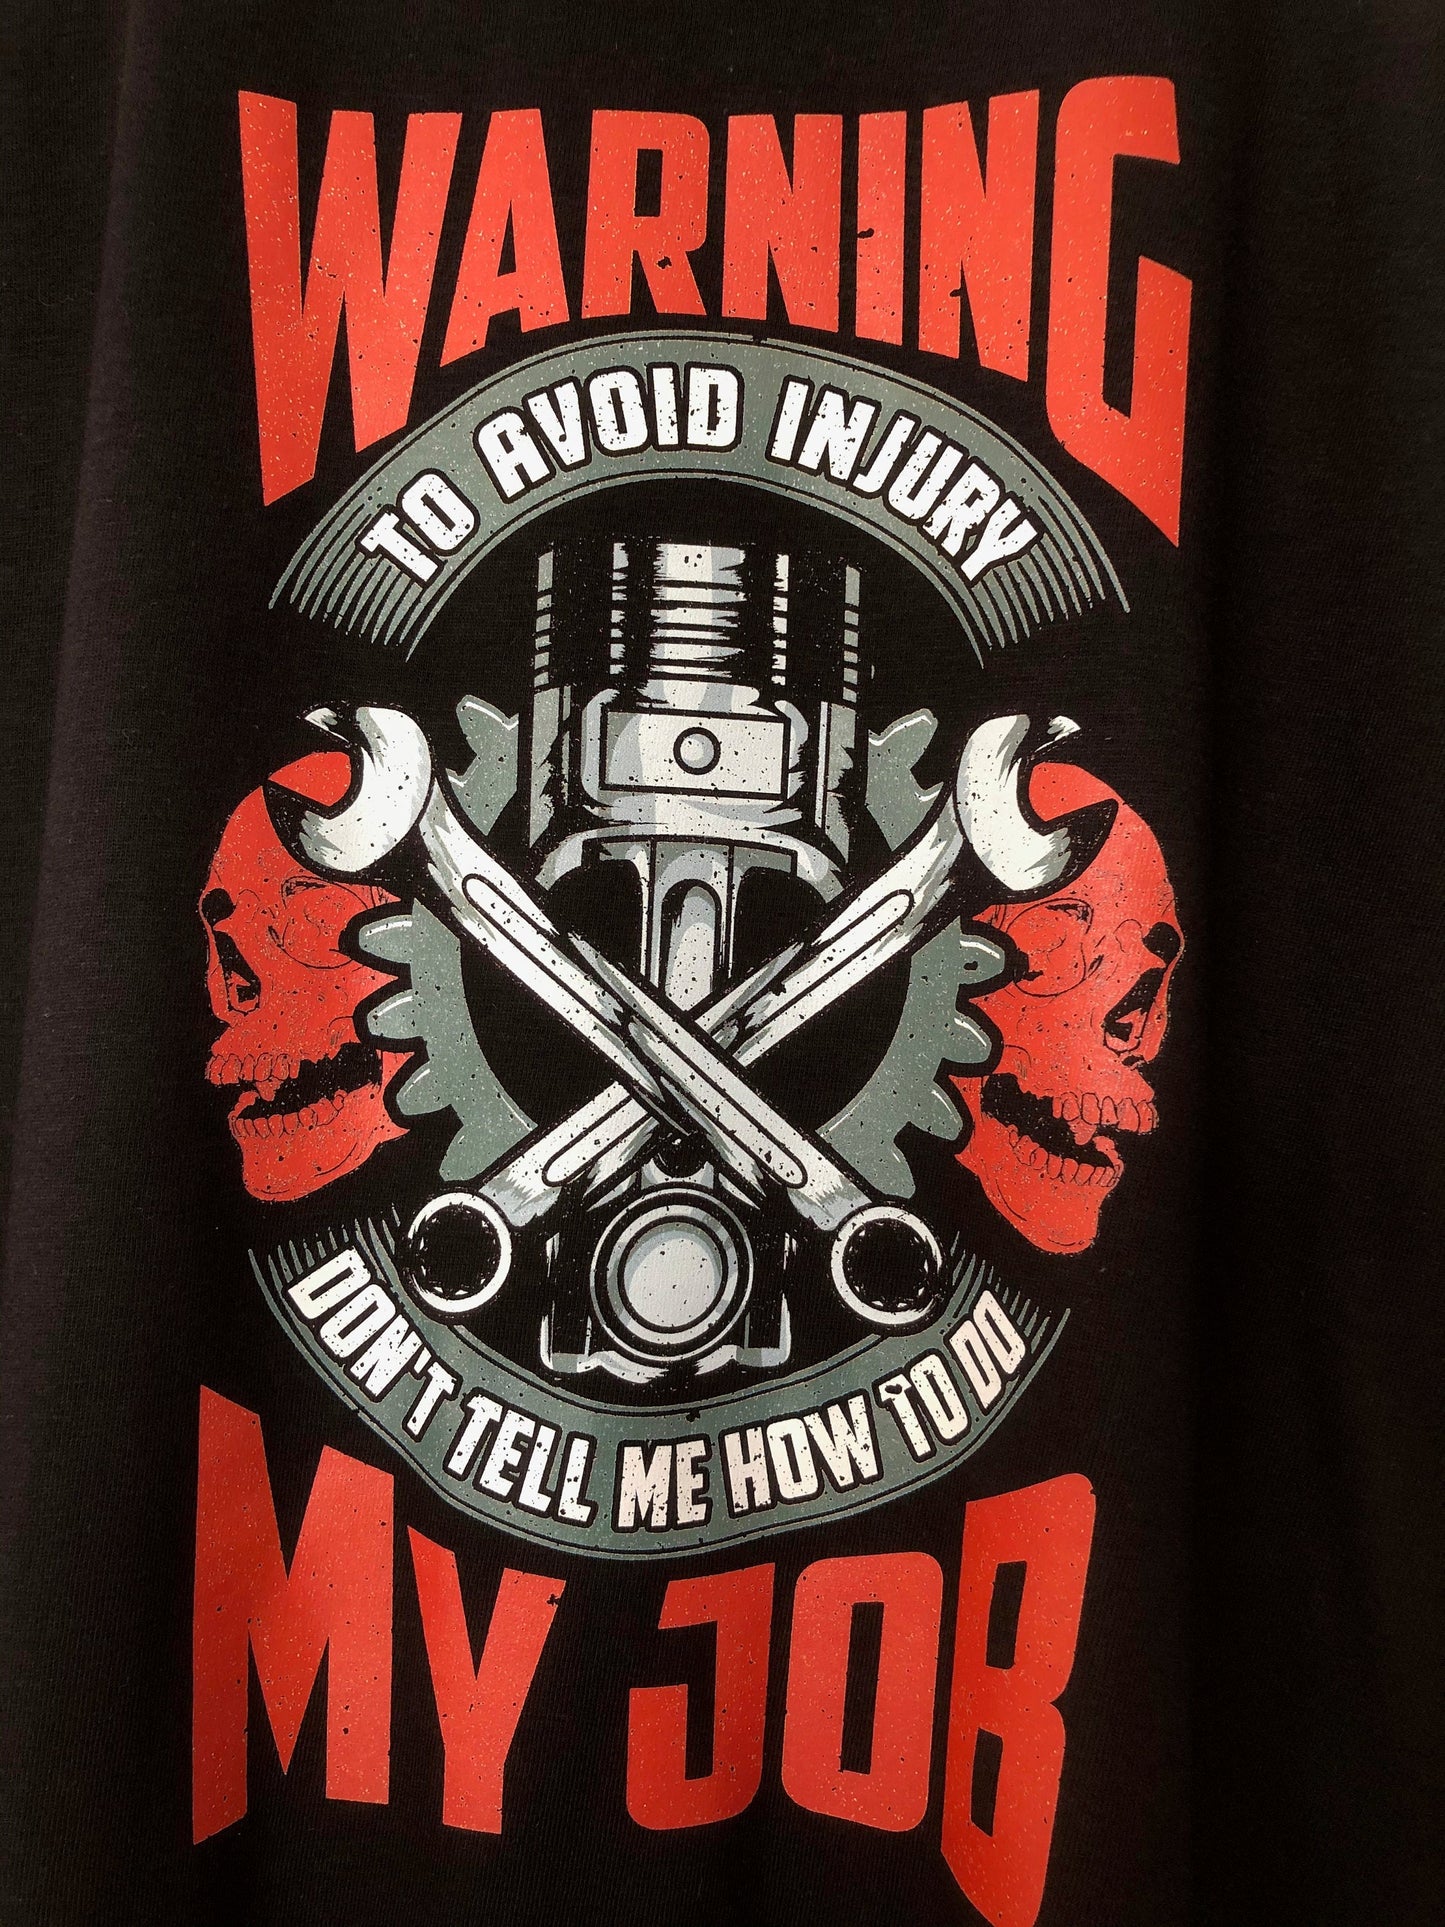 Funny Mechanic T-Shirt, Warning To Avoid Injury Don&#39;t Tell Me How To Do My Job Pun Gift Idea, Humorous Car Auto Worker Tee Shirt Top